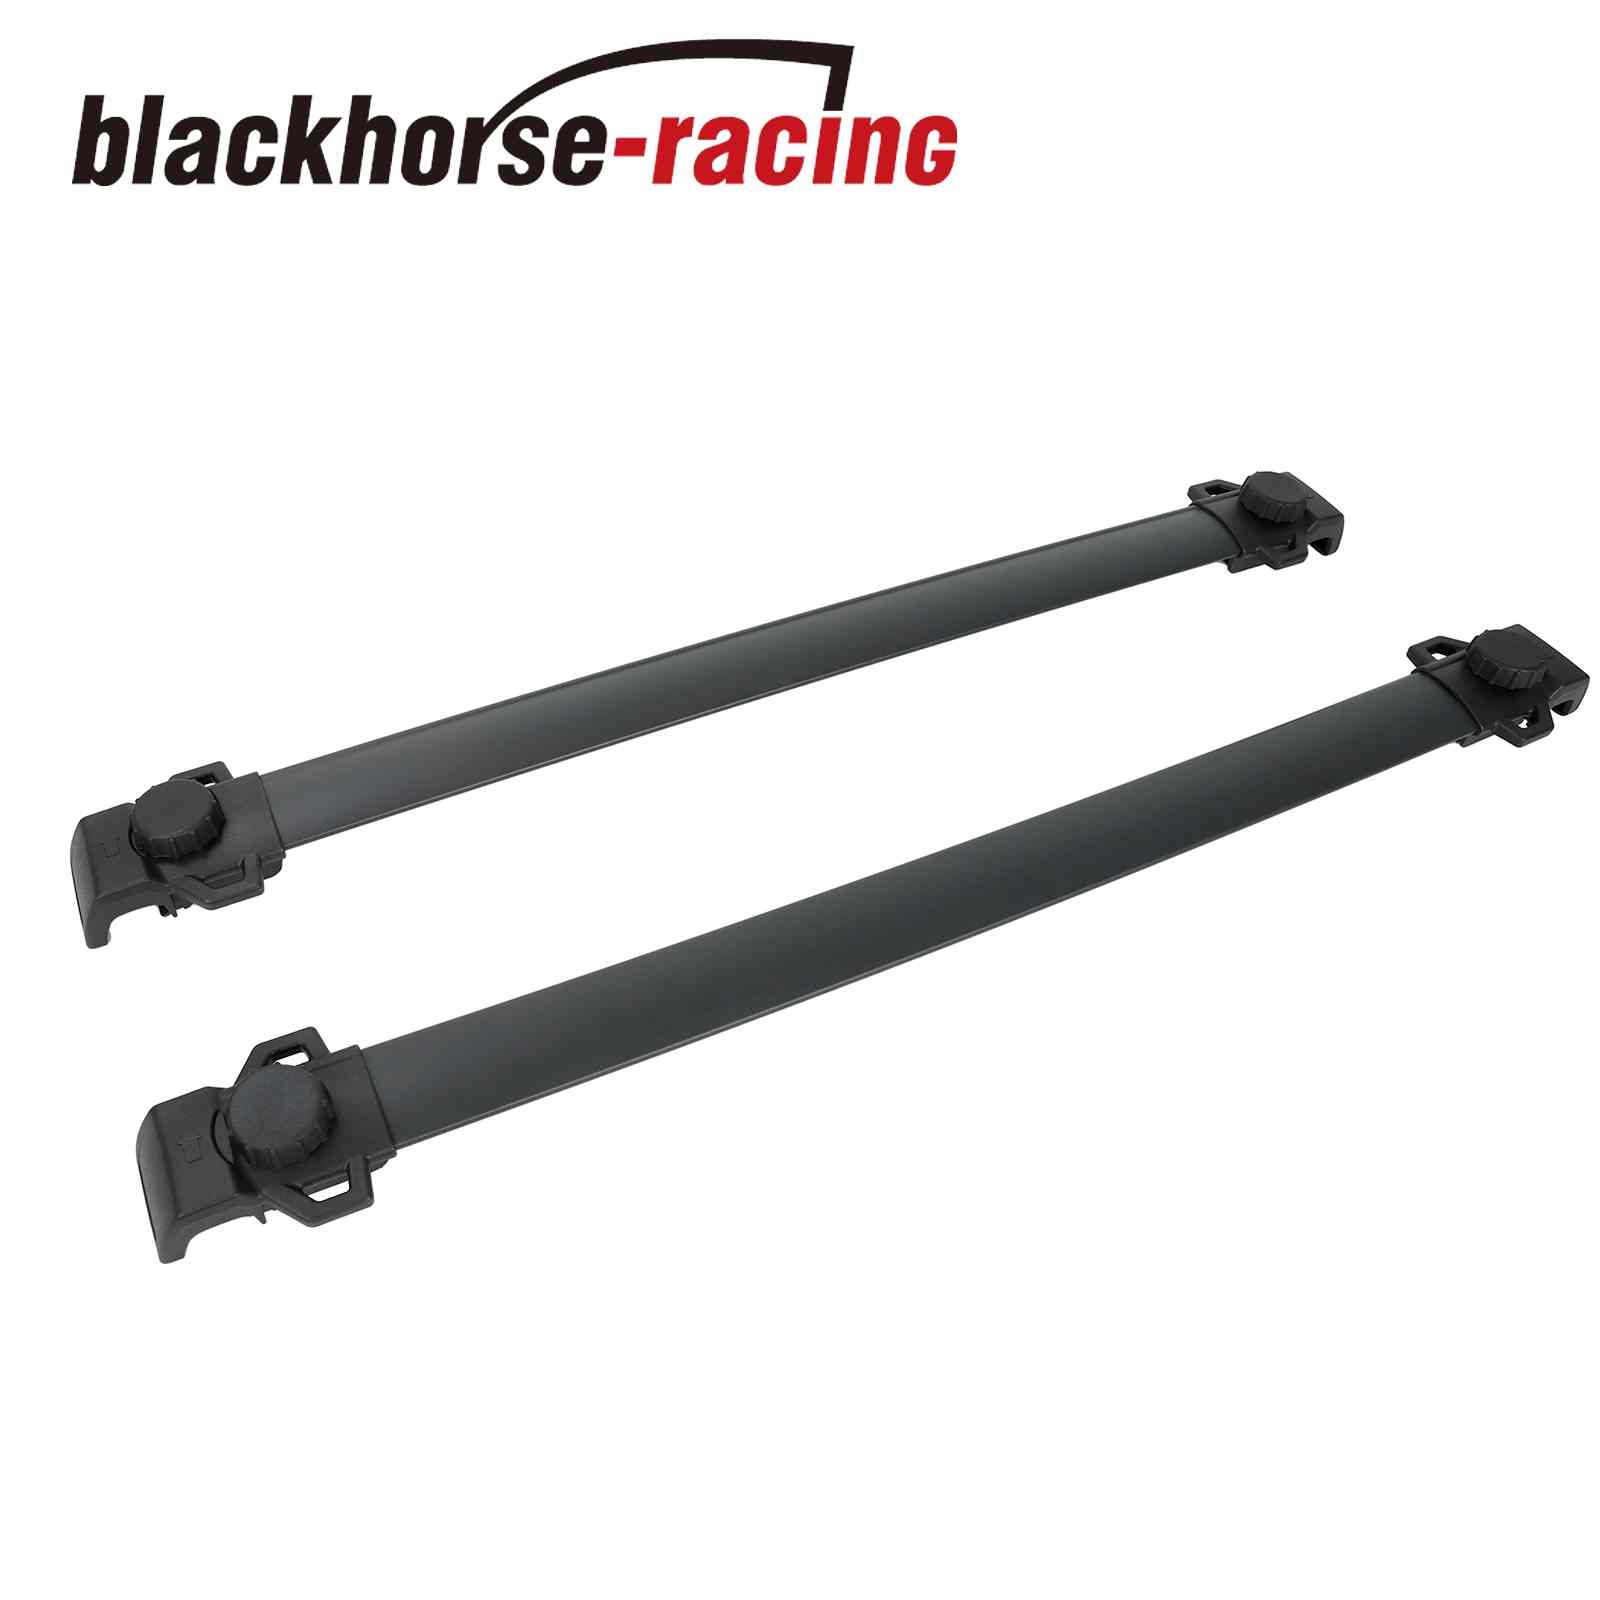 Roof Rack Luggage Canoe Carrier Cross Bars Rail Rooftop For 07-17 Jeep Patriot